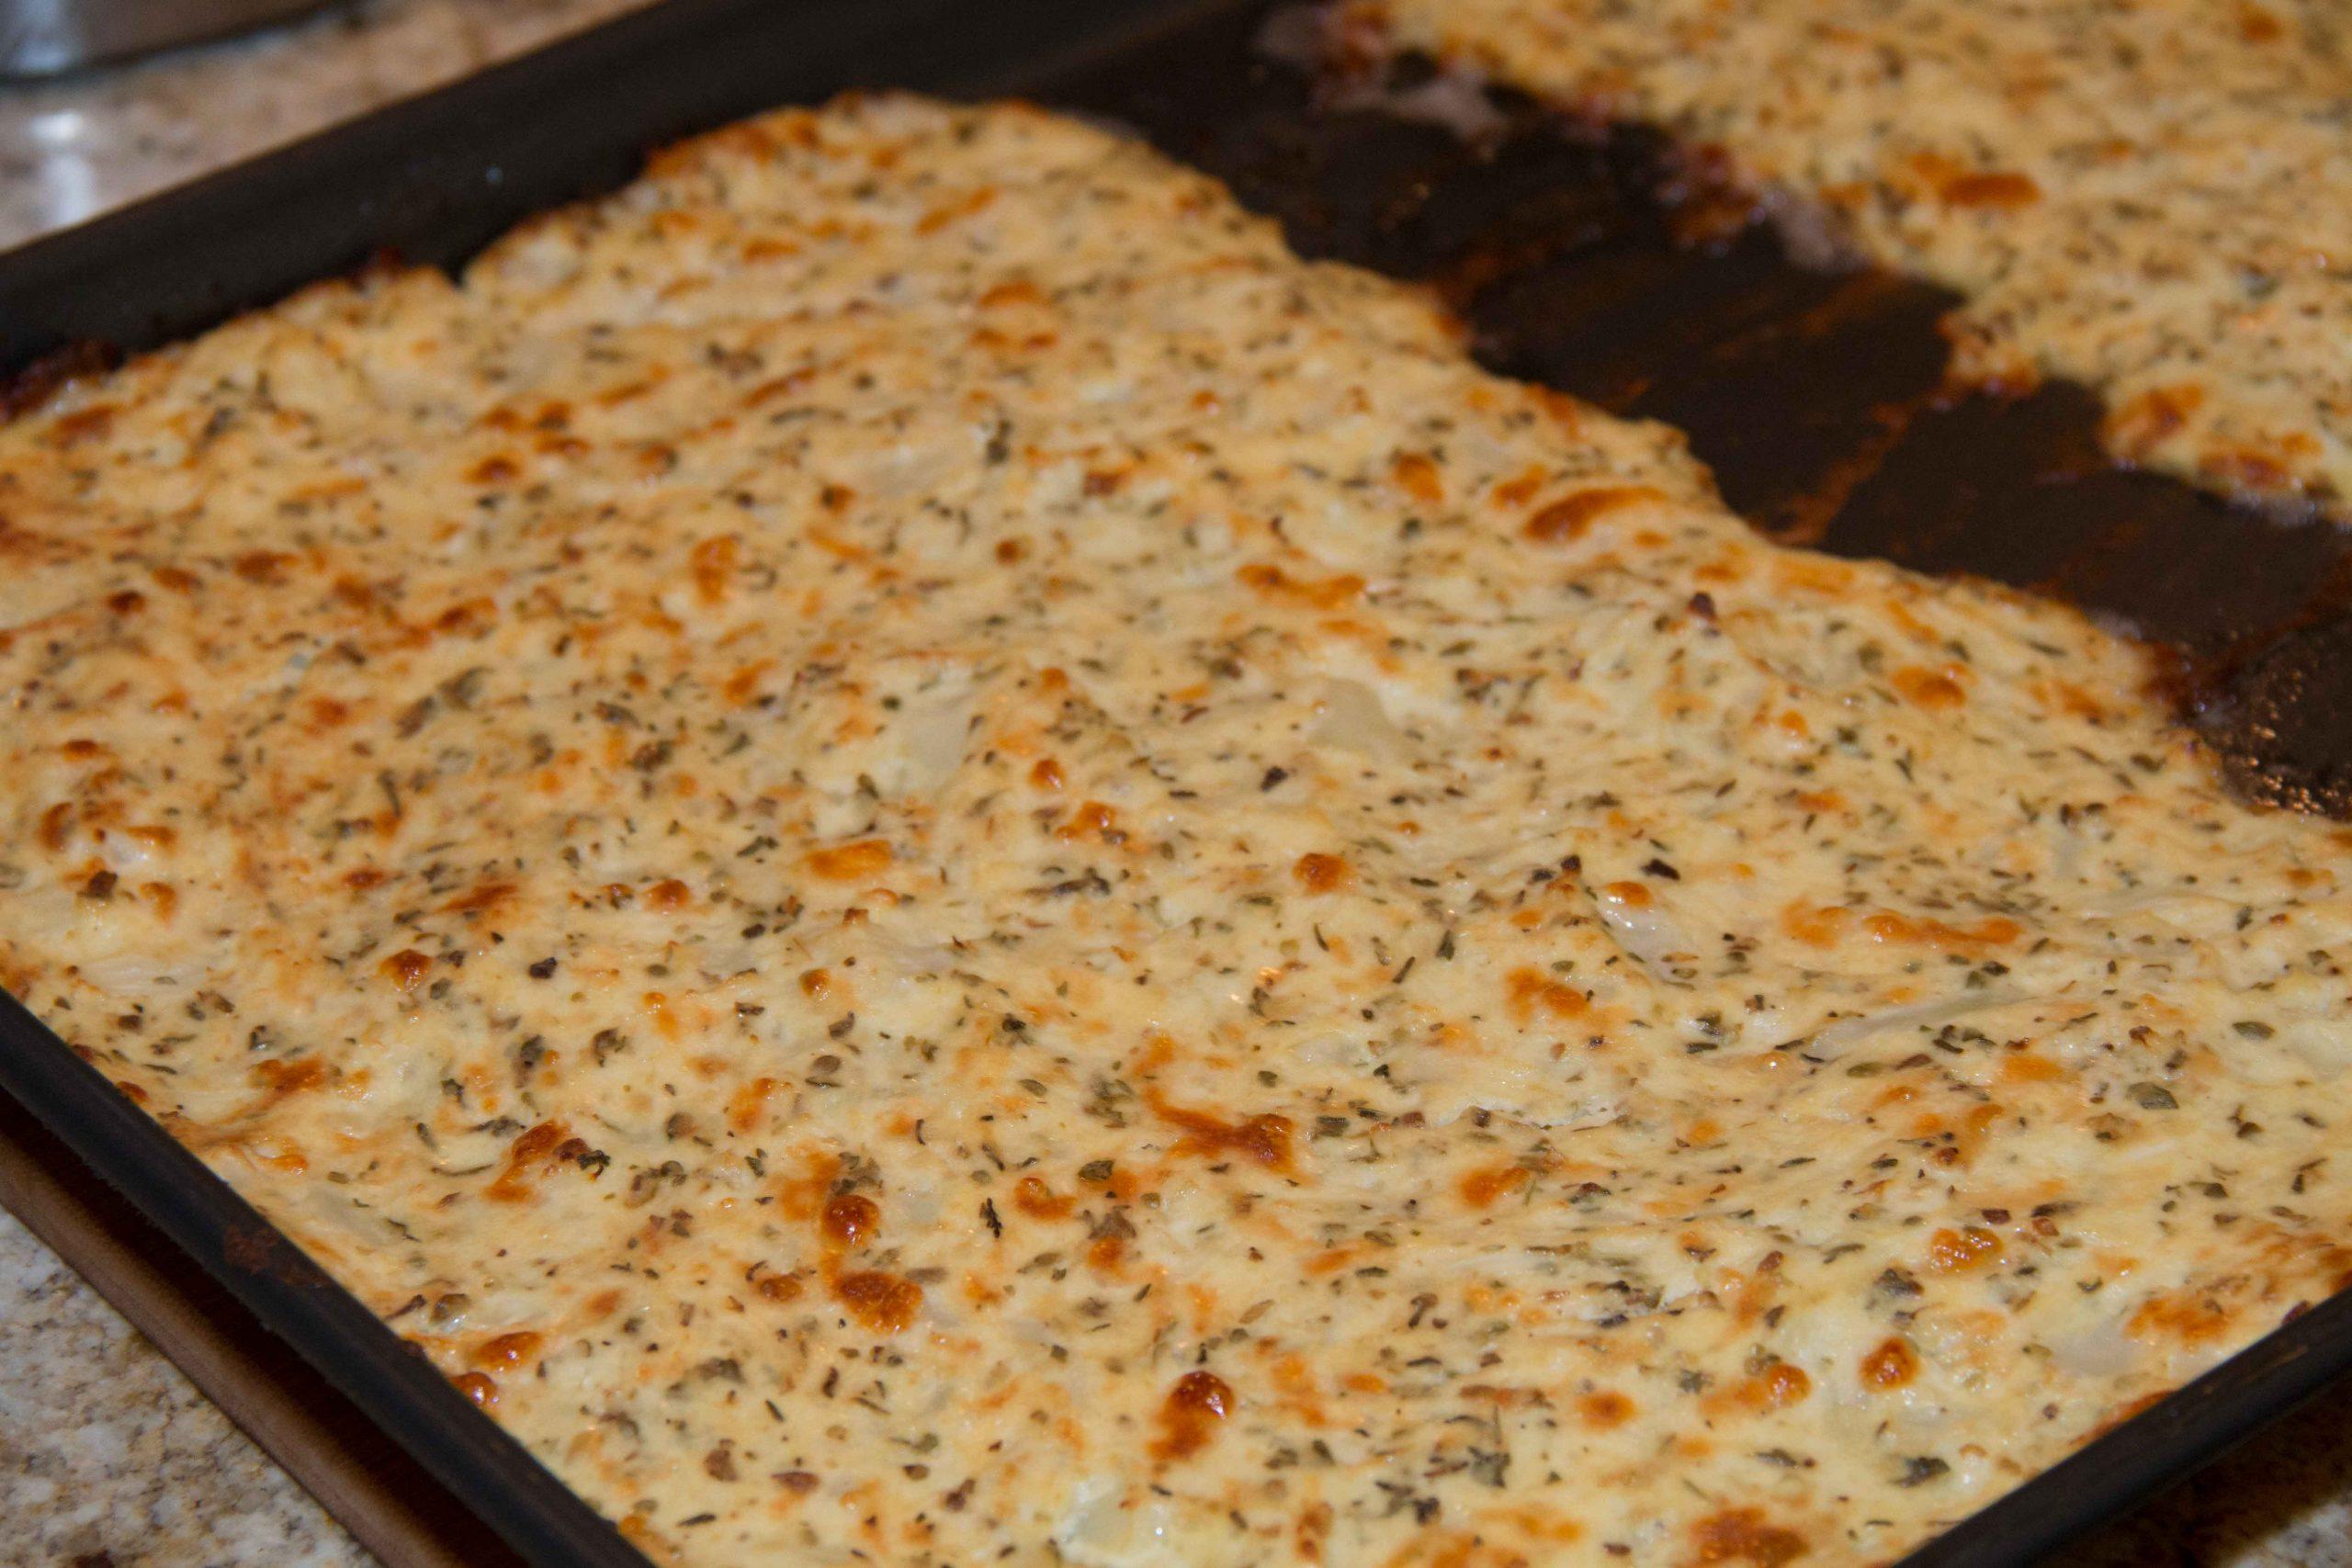 Using cauliflower to make pizza dough and cauliflower breadsticks is a great low-carb and gluten-free idea! Use this same recipe for your pizza crust.